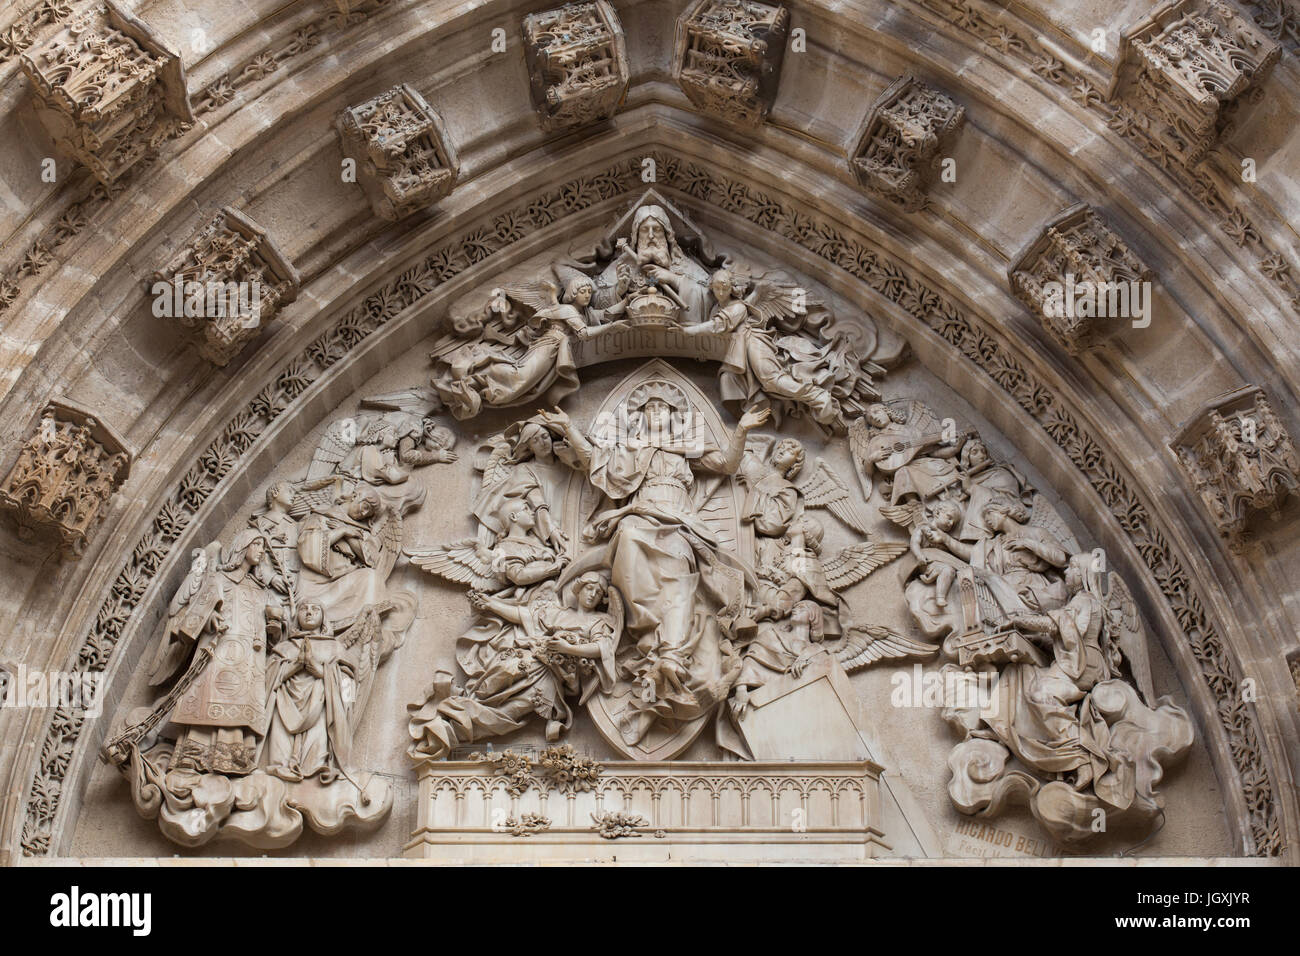 Assumption of Mary. Tympanum by Spanish sculptor Ricardo Bellver (1882) on the Portal of the Assumption (Puerta de la Asunción) of the Seville Cathedral (Catedral de Sevilla) in Seville, Andalusia, Spain. Stock Photo